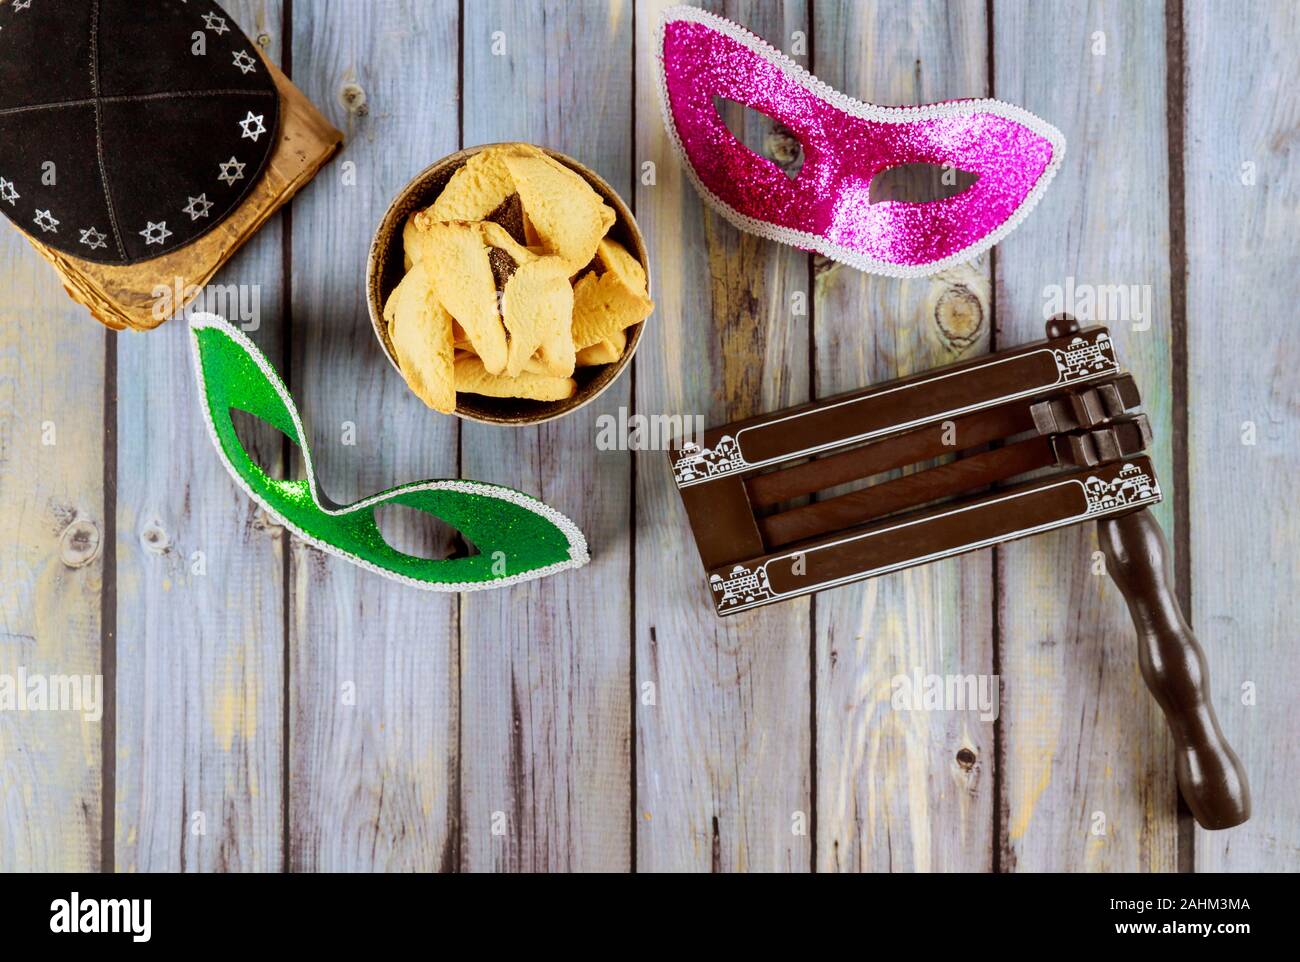 Hamantaschen hamans ears cookies Purim celebration jewish holiday bright party tools and decoration Stock Photo